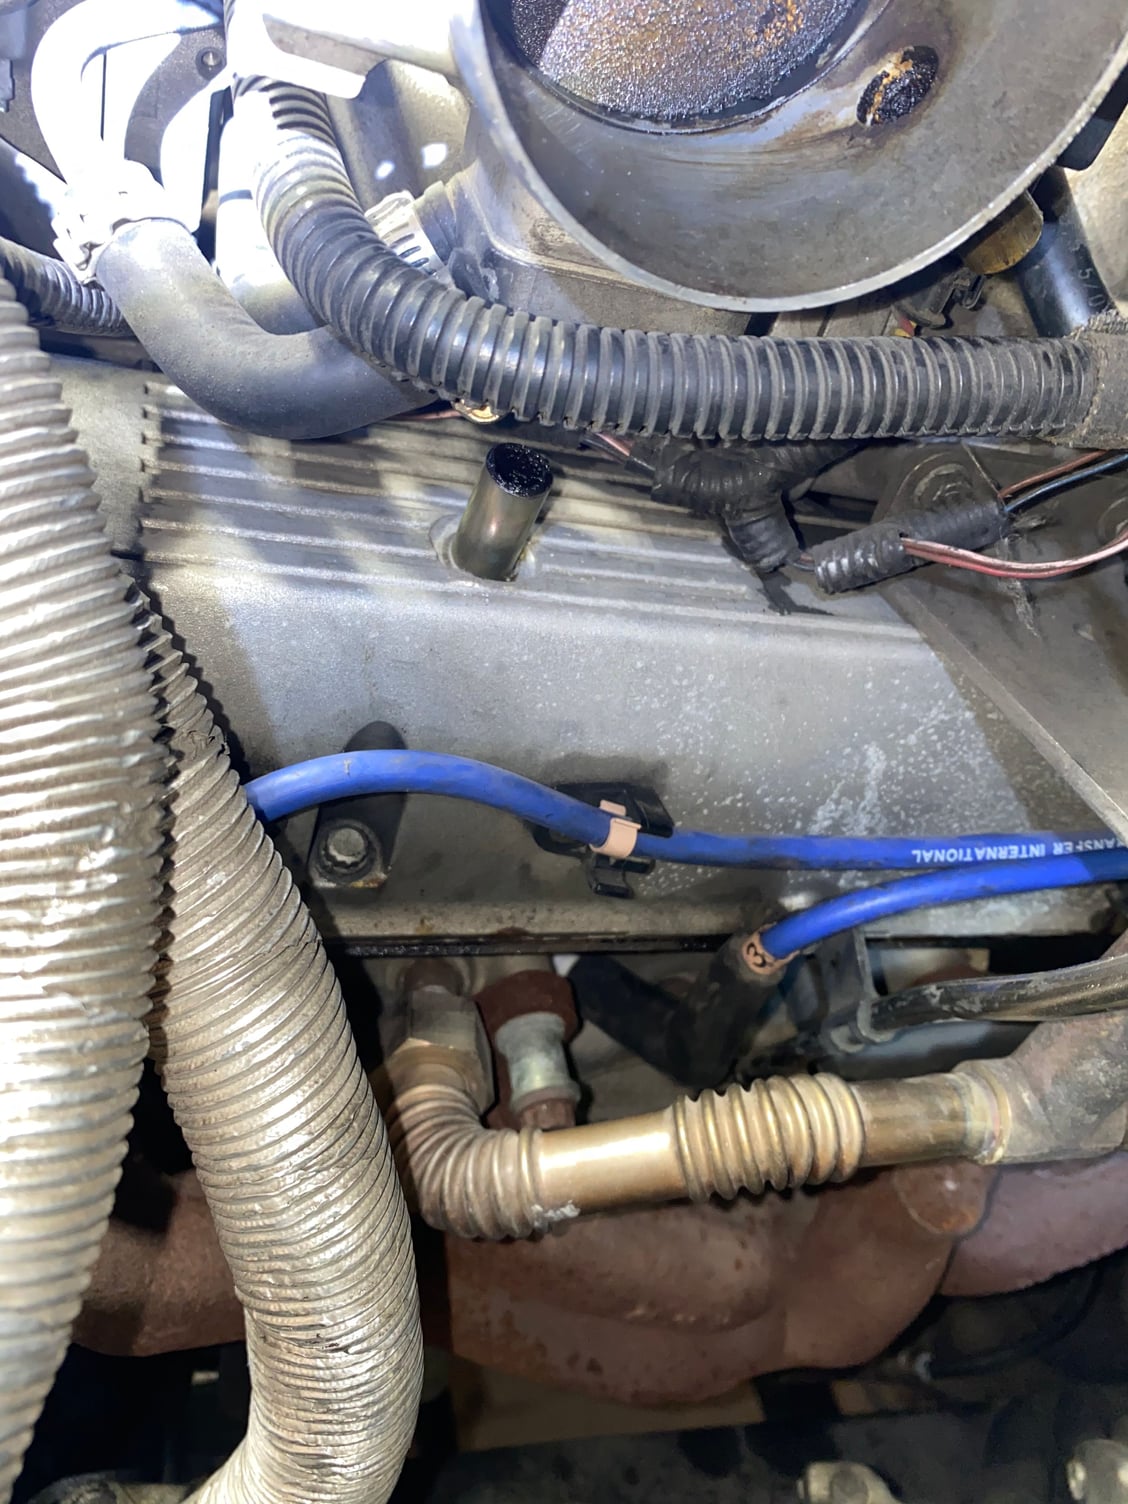 How do I clean my throttle body and it’s hoses? Land